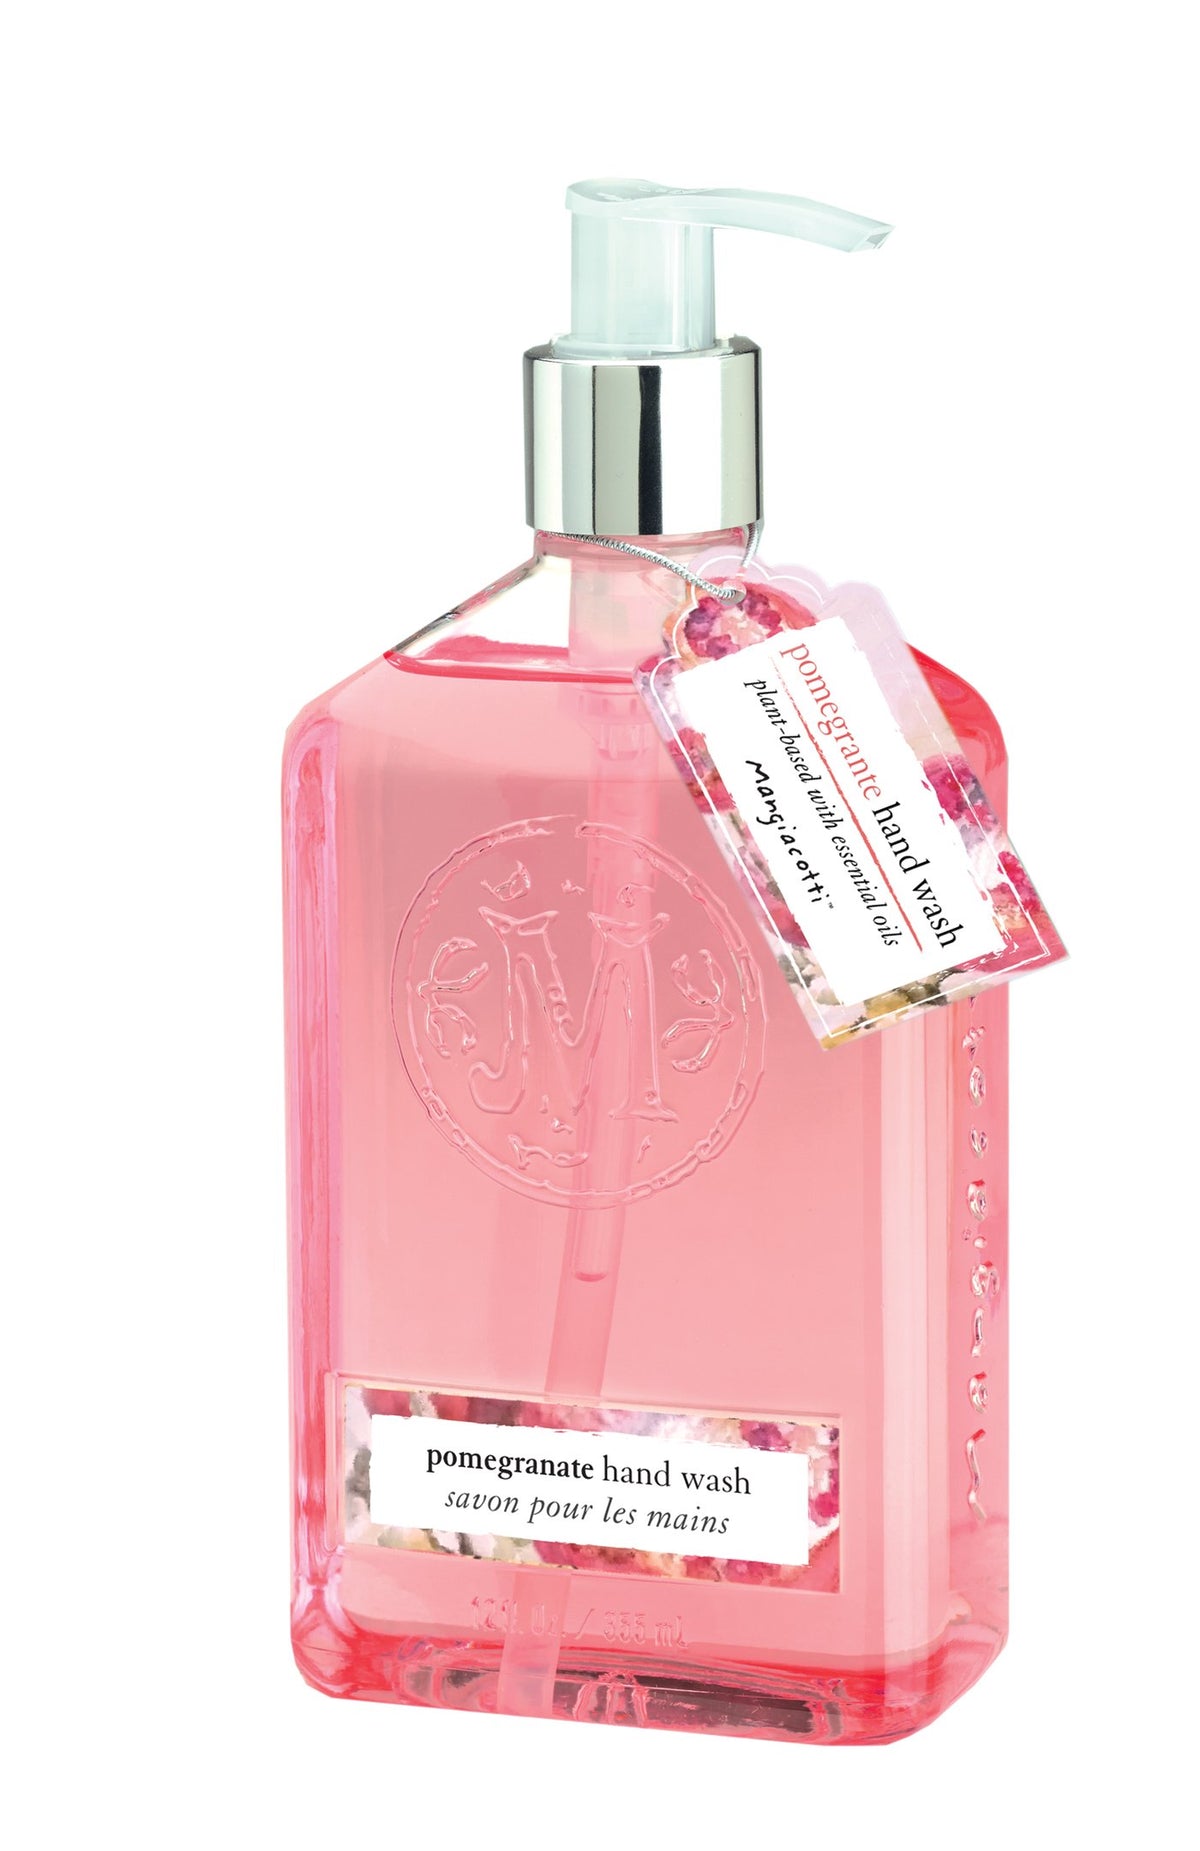 A bottle of Mangiacotti Pomegranate Hand Wash with essential oils and a pump dispenser, featuring elegant embossed branding and a label describing the product in English and French.